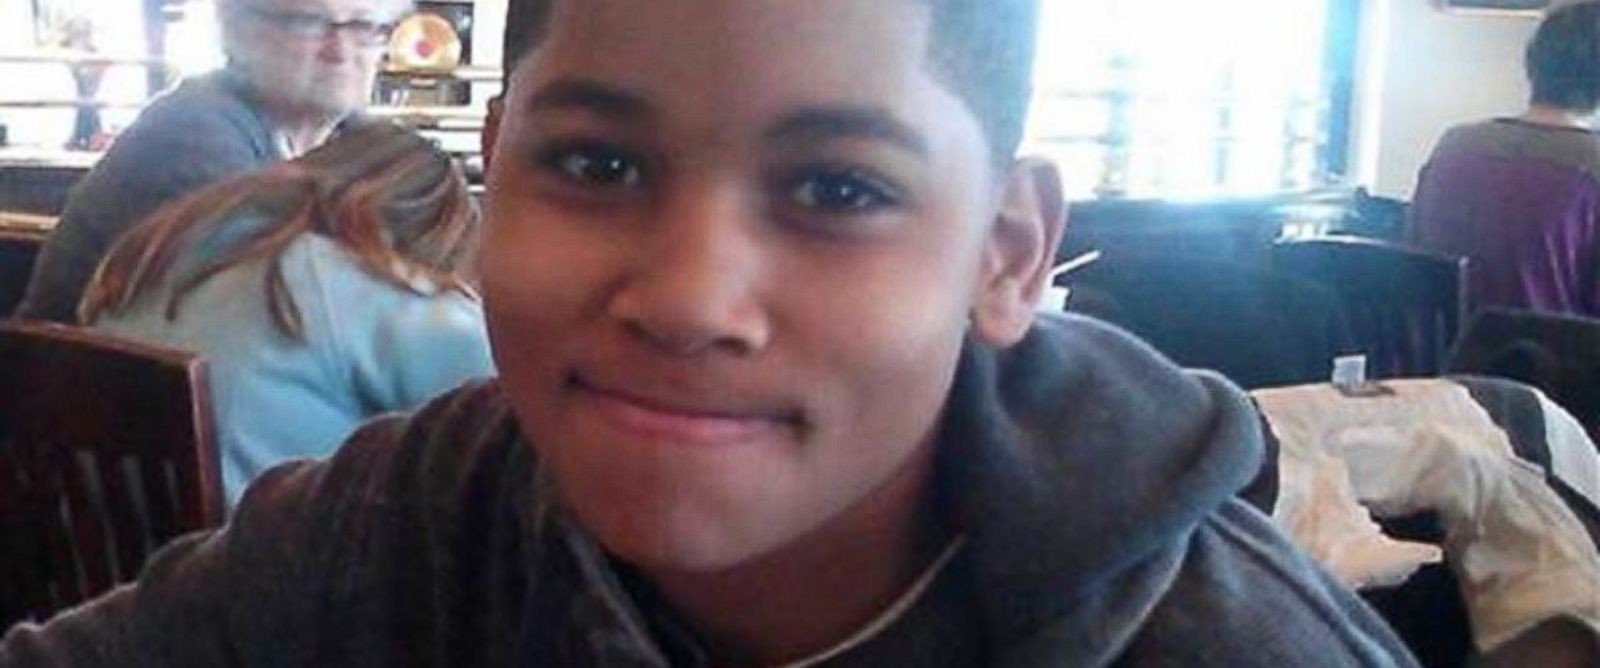 Cleveland Mayor on 6M Tamir Rice Settlement 'There Is No Price' on